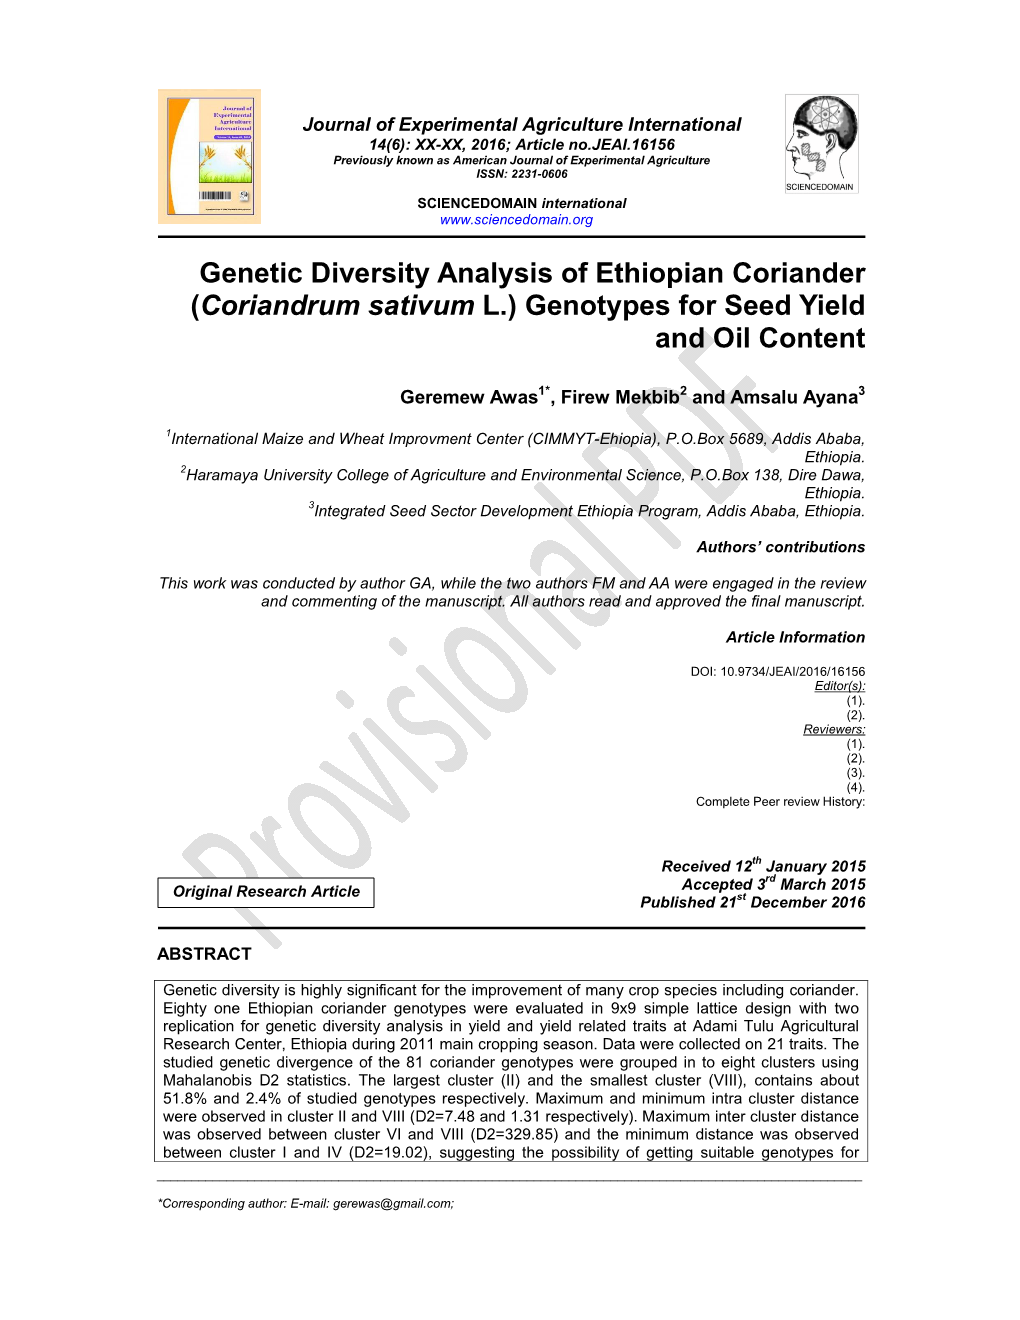 Genetic Diversity Analysis of Ethiopian Coriander (Coriandrum Sativum L.) Genotypes for Seed Yield and Oil Content